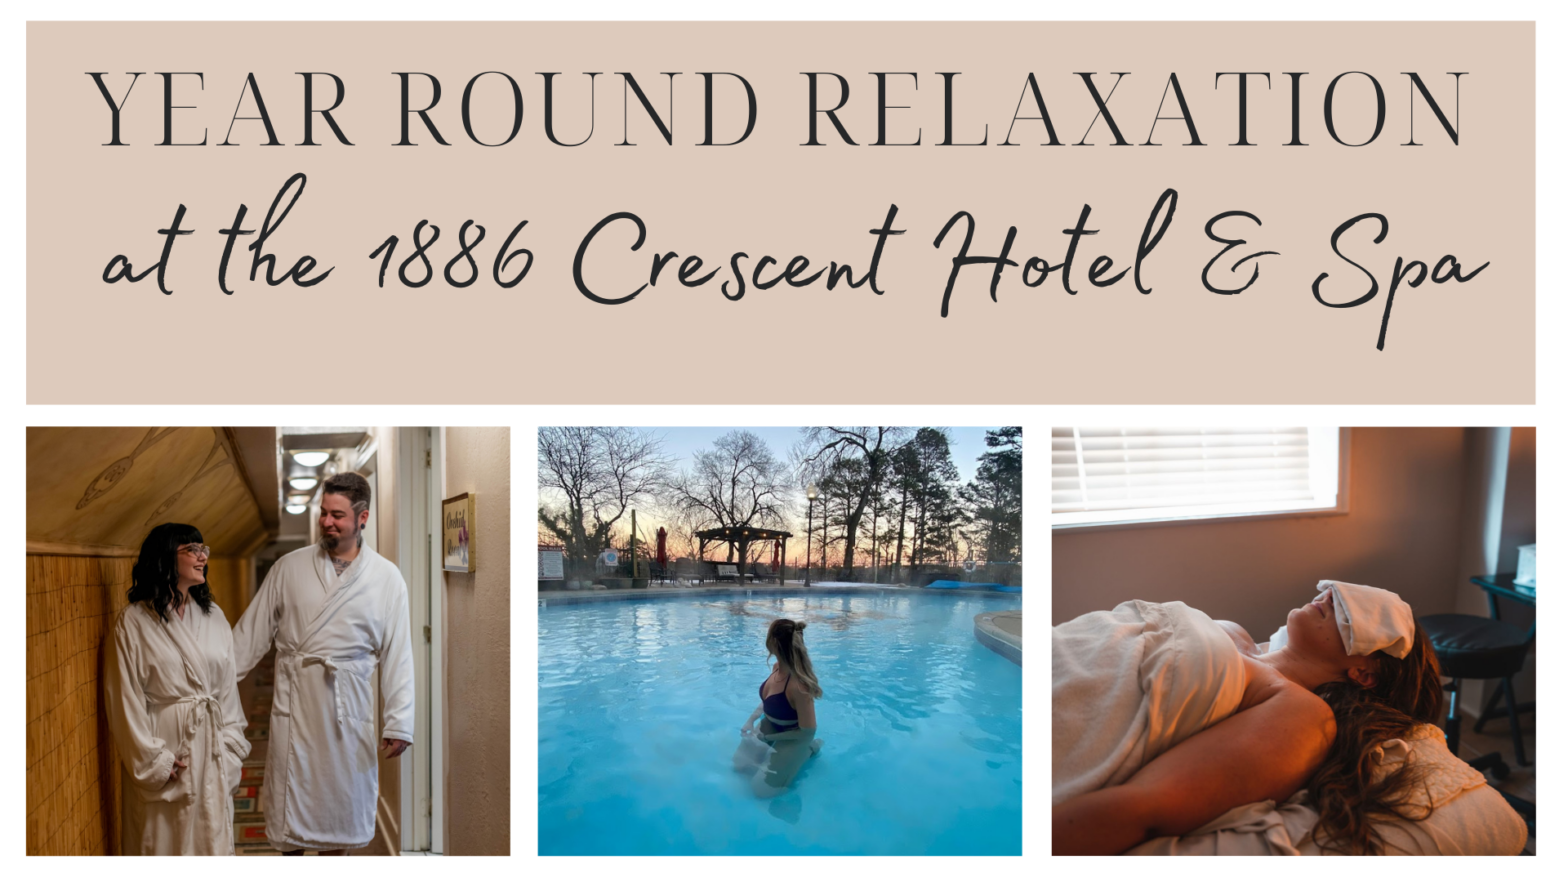 Year Round Relaxation in Eureka Springs at the Crescent Hotel